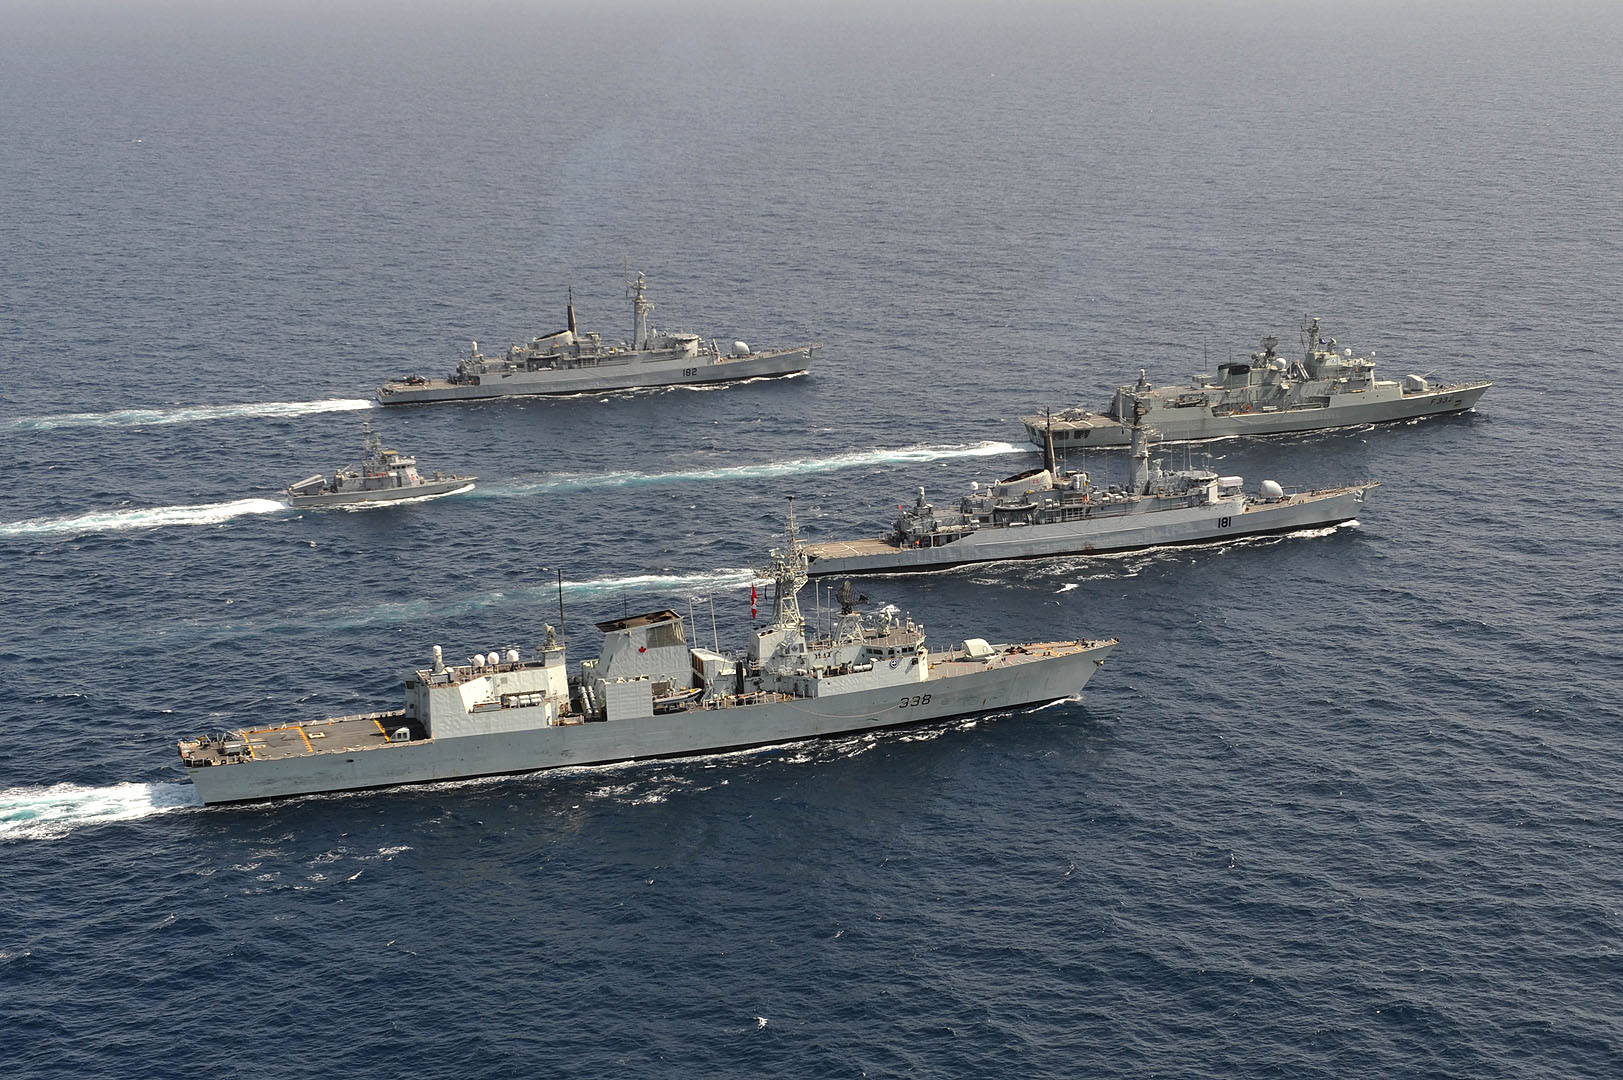 IS2009-6638 28 April 2009 Indian Ocean  Her Majesty's Canadian Ship (HMCS) Winnipeg (forefront), Standing NATO Maritime Group 1 (SNMG1) and Pakistani Navy maneuver for a photo opportunity together in the Indian Ocean at the conclusion of a two-day joint naval exercise.   HMCS Winnipeg is operating in the Gulf of Aden under Standing NATO Maritime Group 1 (SNMG1) to counter acts of piracy and provide security for transiting merchant vessels. Commanded by Commander Craig Baines, the Halifax-class patrol frigate has a crew of approximately 240, including a CH-124 Sea King helicopter detachment.  Canada's participation in SNMG1, conducted under Operation SEXTANT, represents a continuing commitment to international peace and security. HMCS Winnipeg is the 5th Canadian Ship to deploy since 2006 to join SNMG1, which represents a multi-national maritime force capable of conducting missions across a broad spectrum of operations anywhere around the world.  Photo: Warrant Officer Carole Morissette, Canadian Forces Combat Camera 